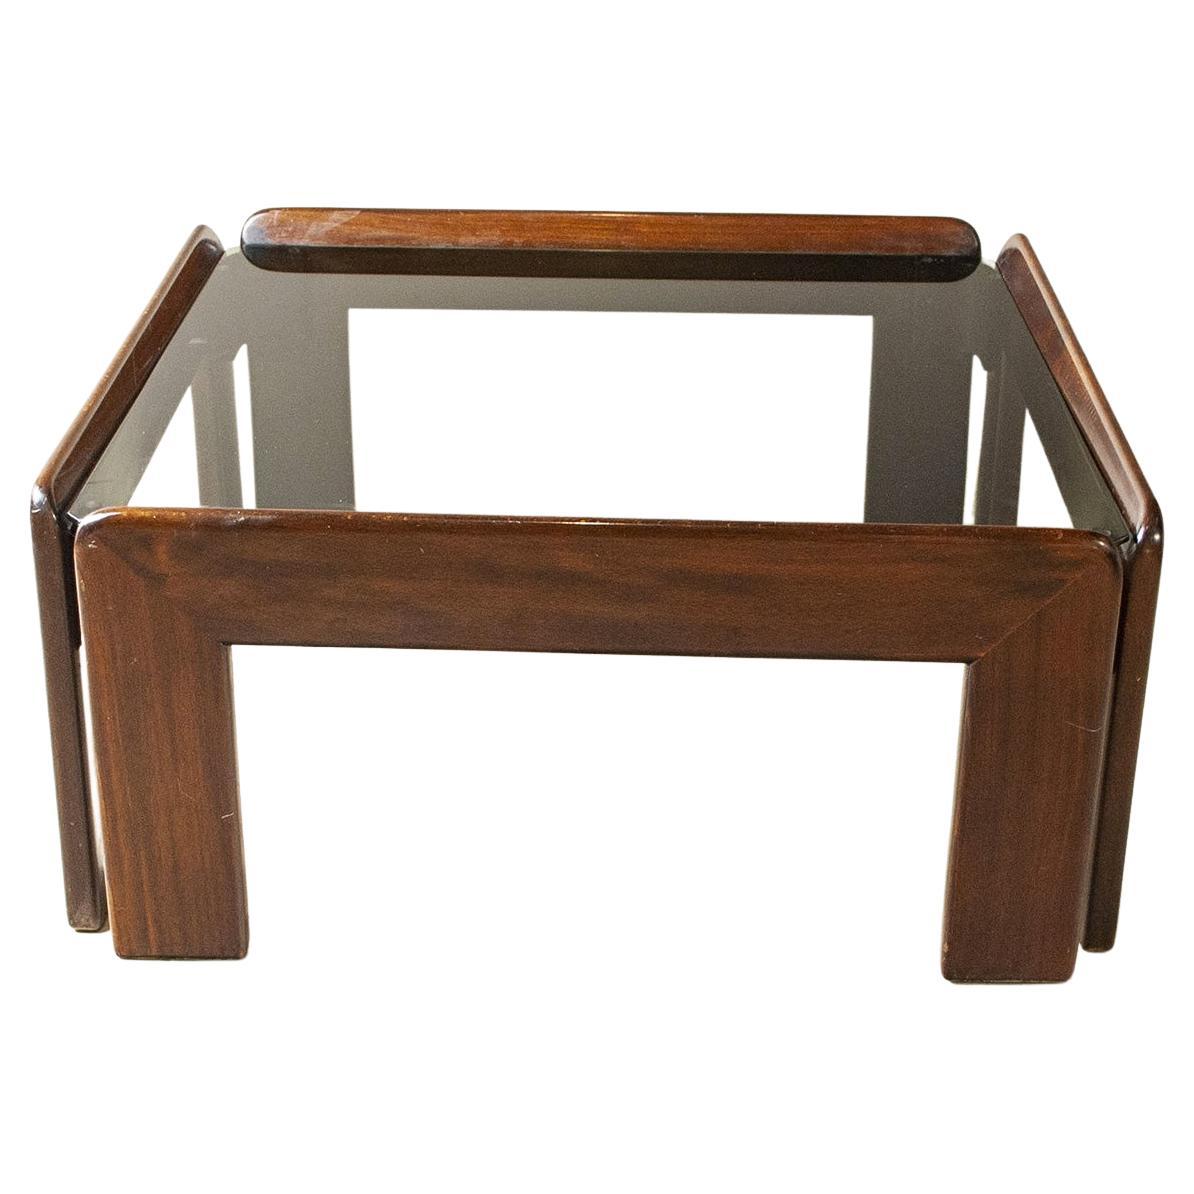 Coffee table wooden structure with smoked glass top 1970s production by Afra & Tobia Scarpa.
Afra and Tobia Scarpa are award-winning Italian postmodern architects and designers. Their pieces can be found in museums in the United States and Europe,